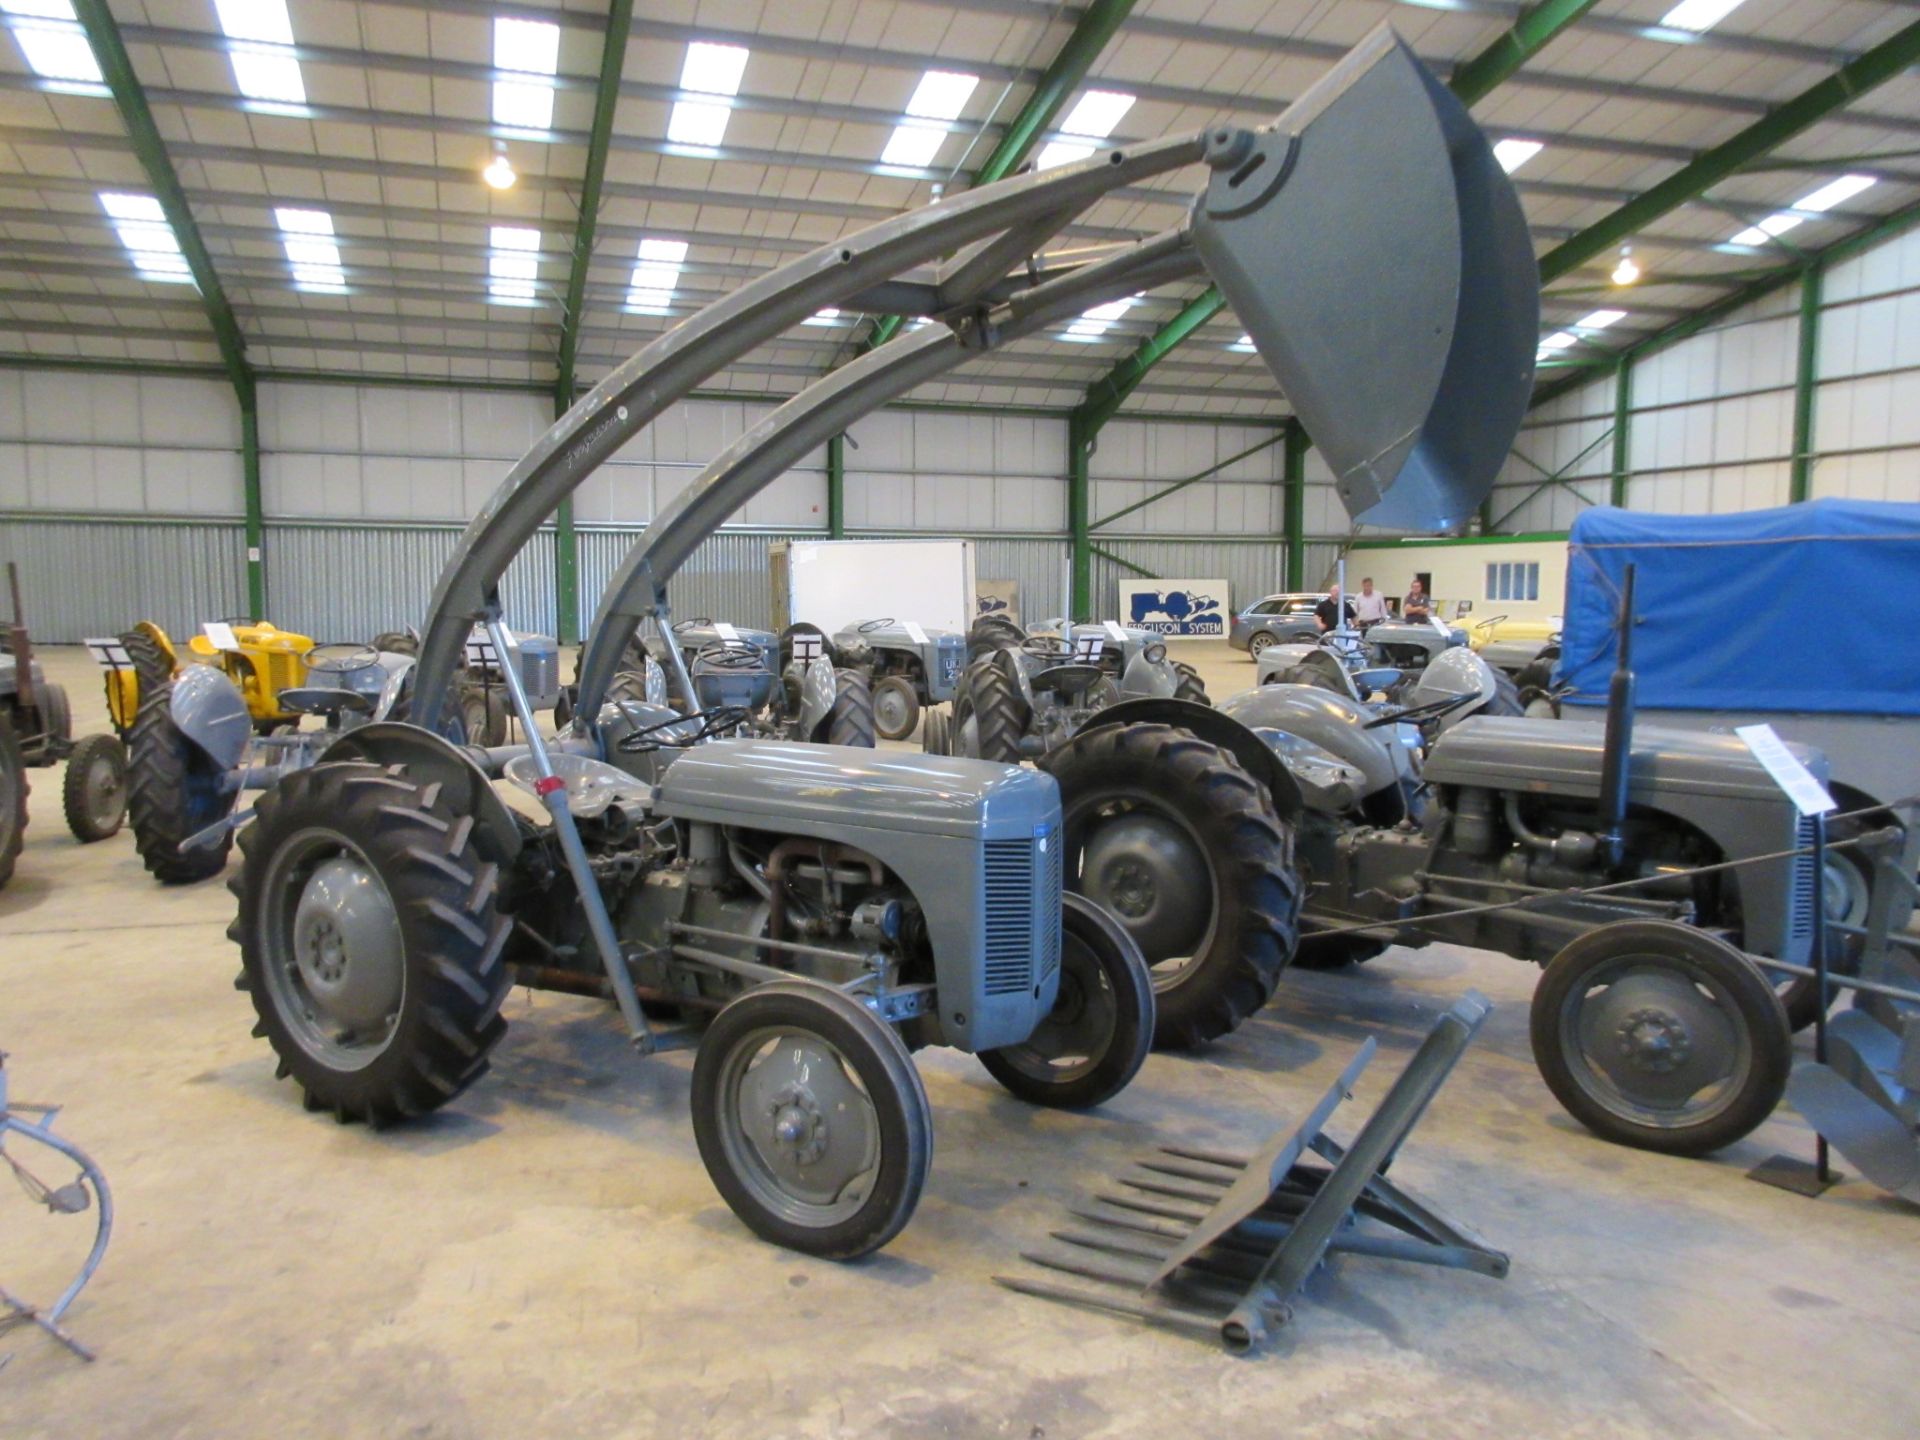 1950 FERGUSON TE-A20 4cylinder petrol/paraffin TRACTOR Reg No: 461 XUD Serial No: TEA141207 Fitted